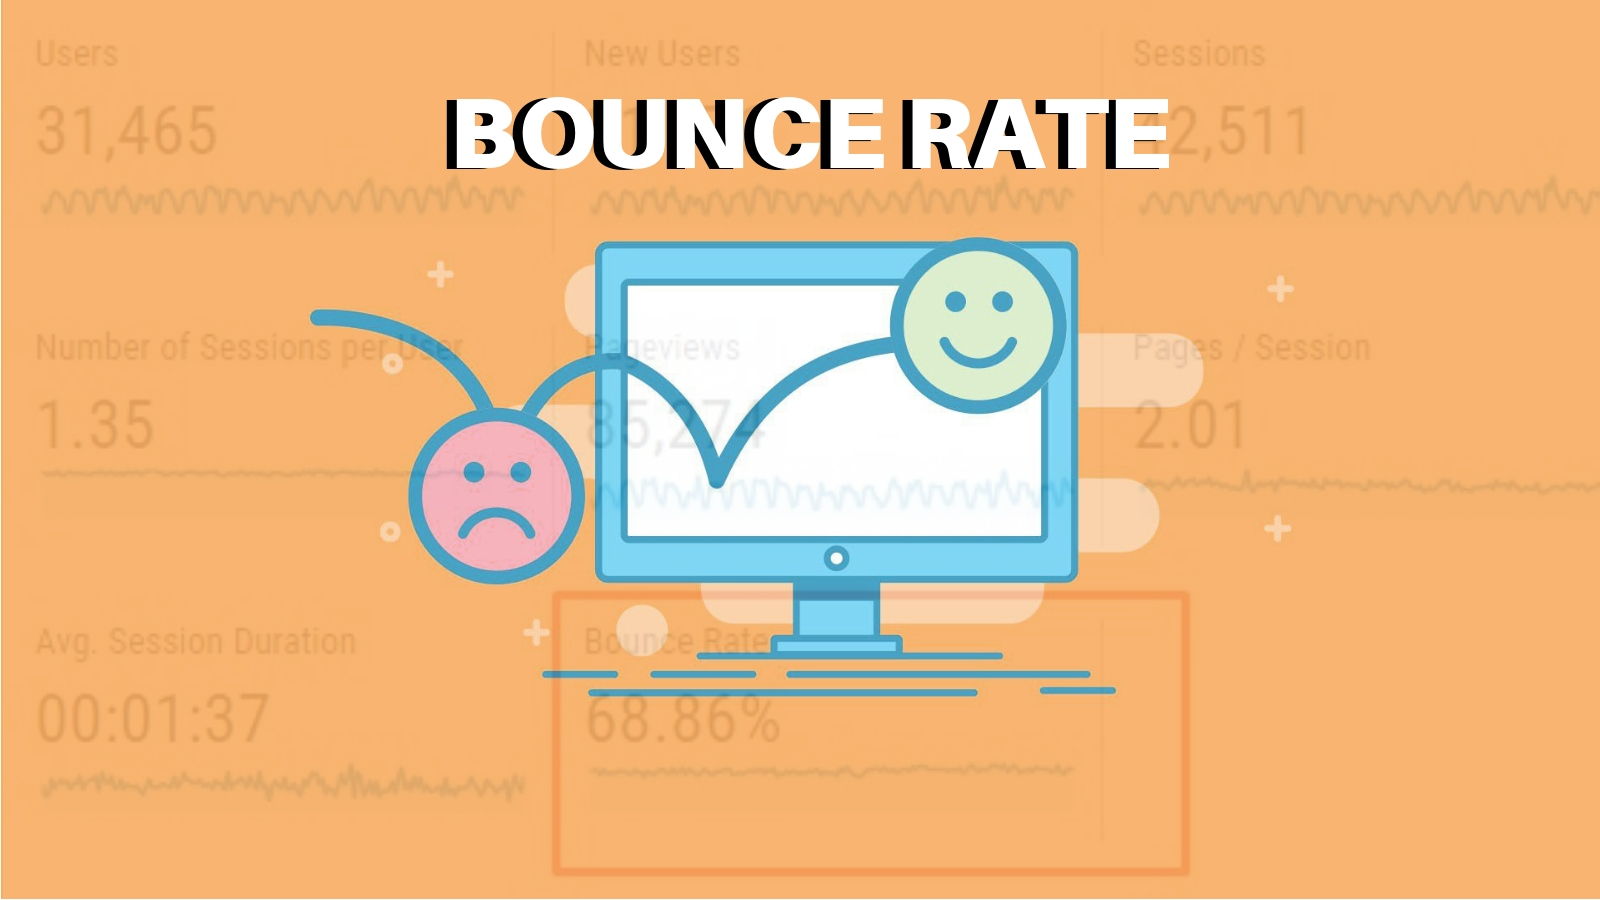 10 tips to reduce bounce rate and increase your conversions